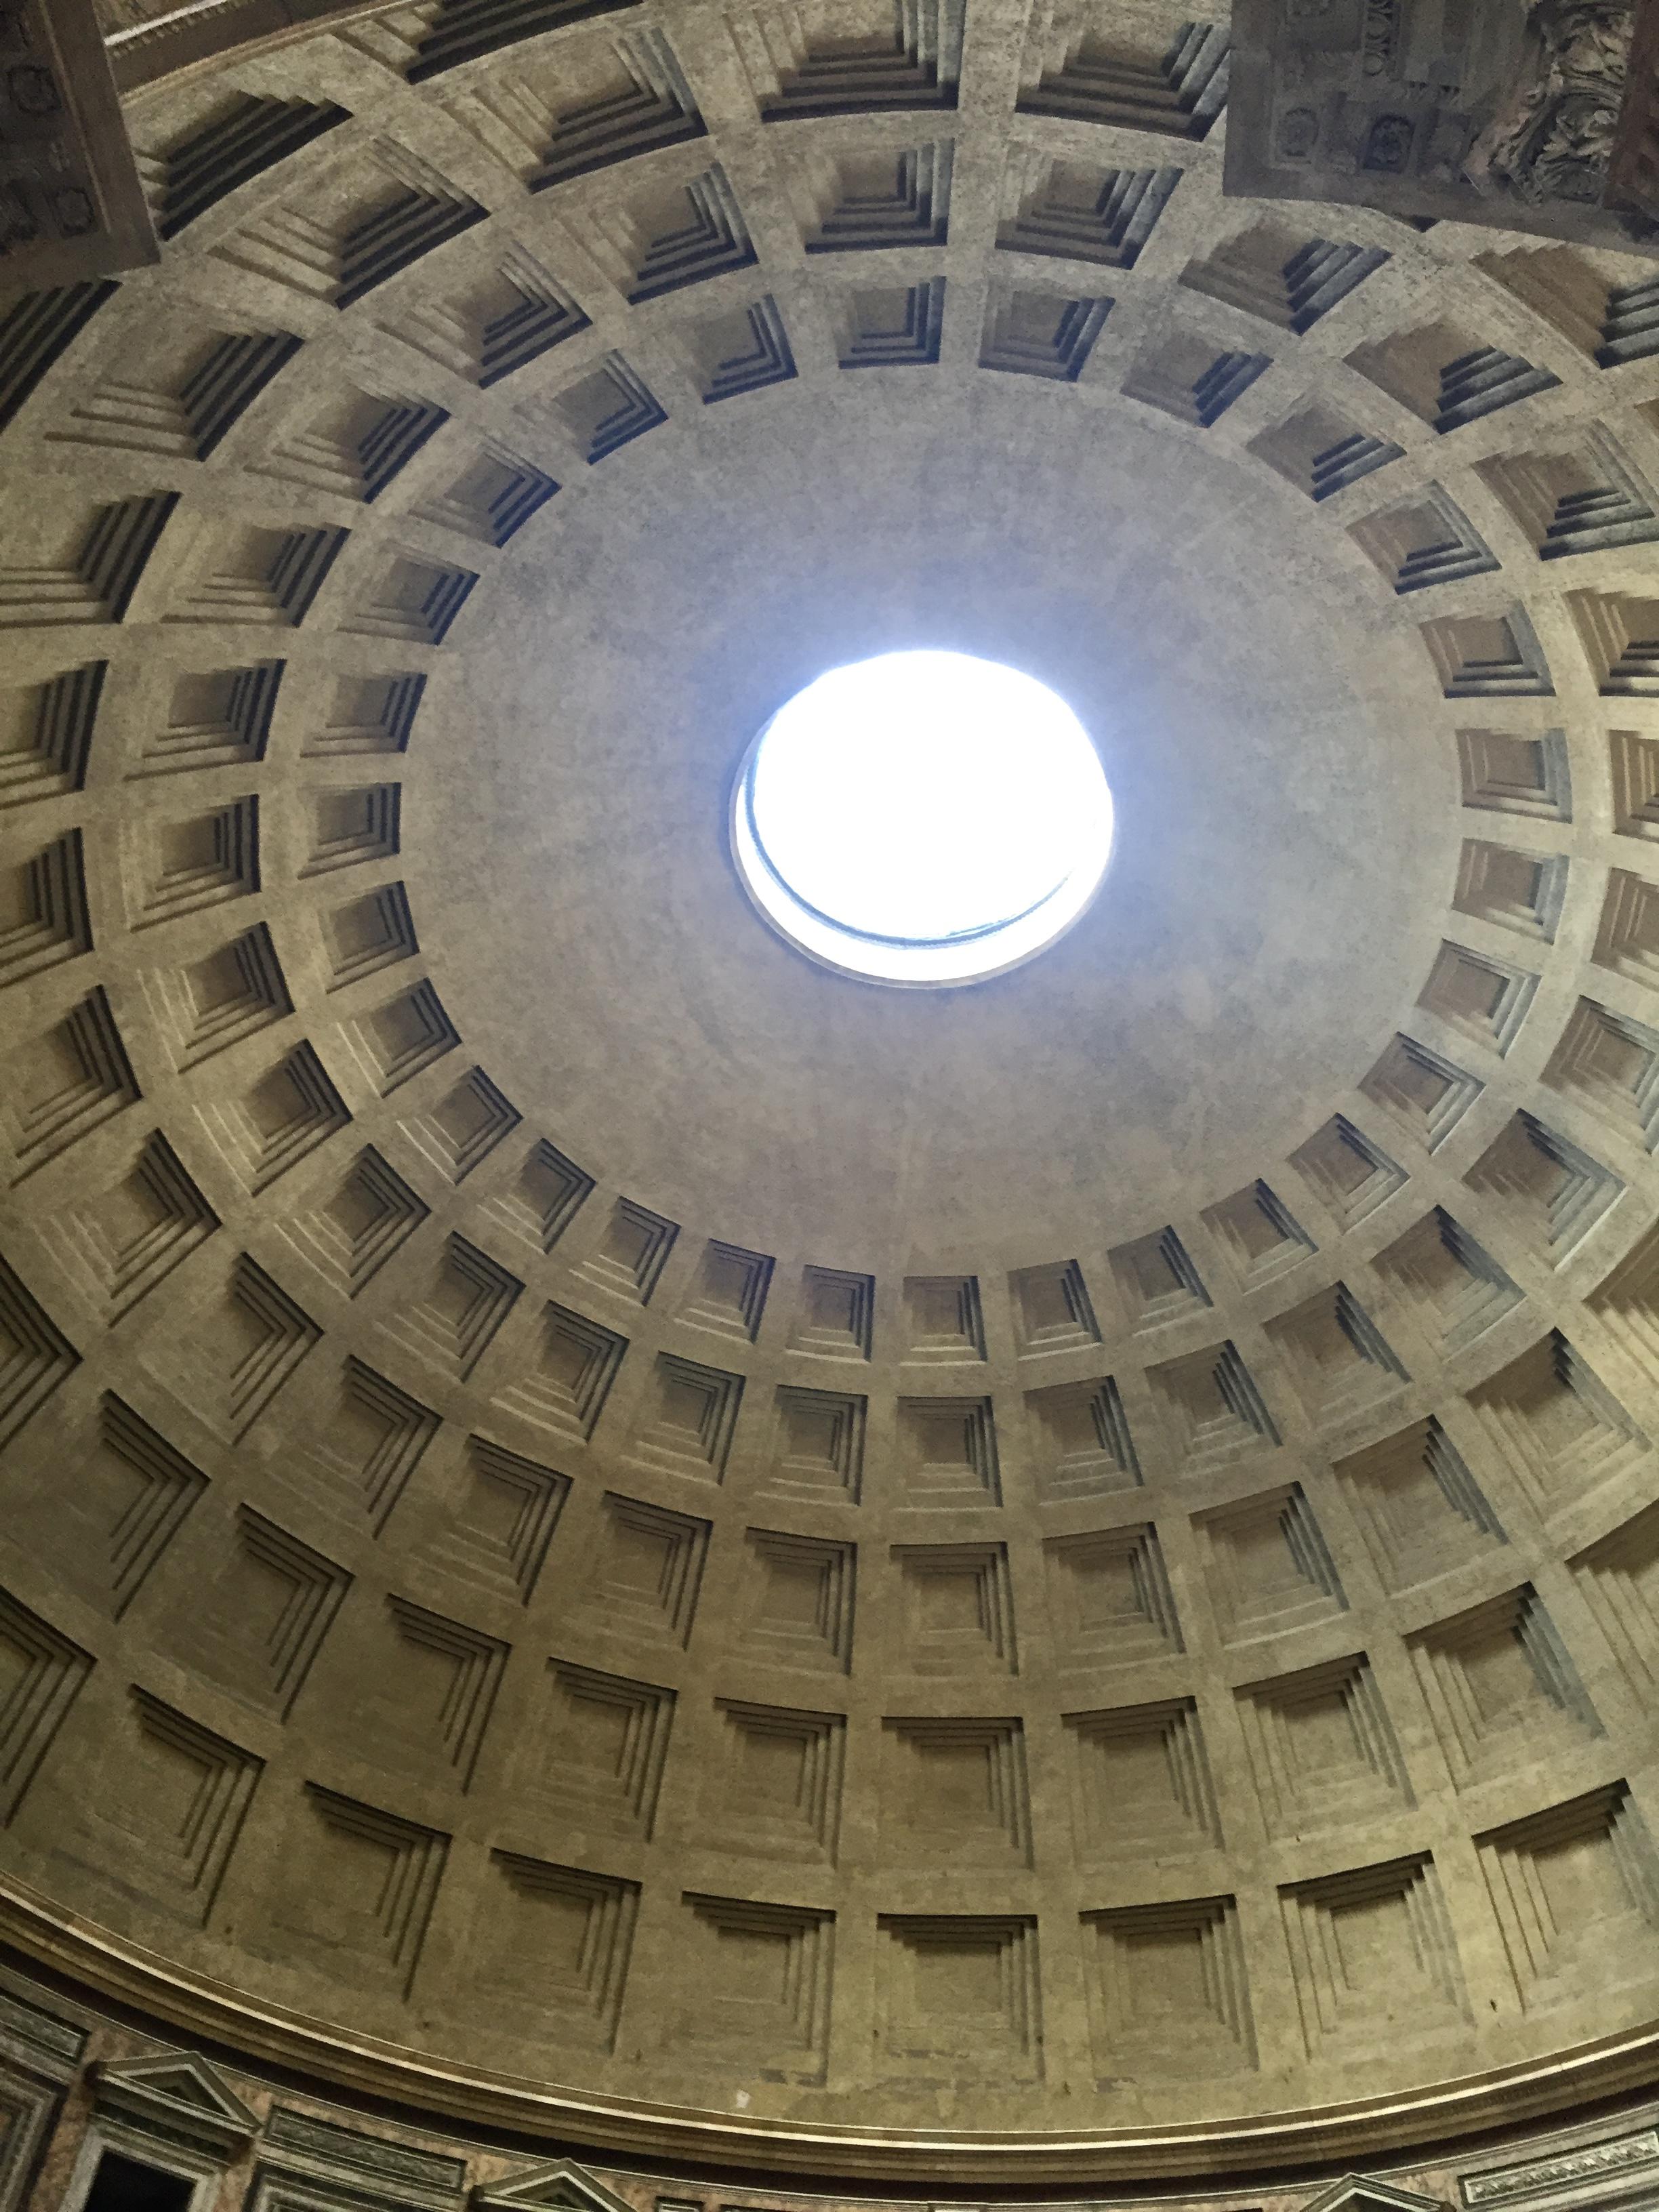 The Oculus of the Roman Pantheon is the building's source of light and ventilation. It may have also been intended to complement ceremonies, overwhelm the senses, and reduce structural pressure. 22 holes, spread across a sloped floor, still drain the rainwater. 2nd century CE. Rome, Italy.